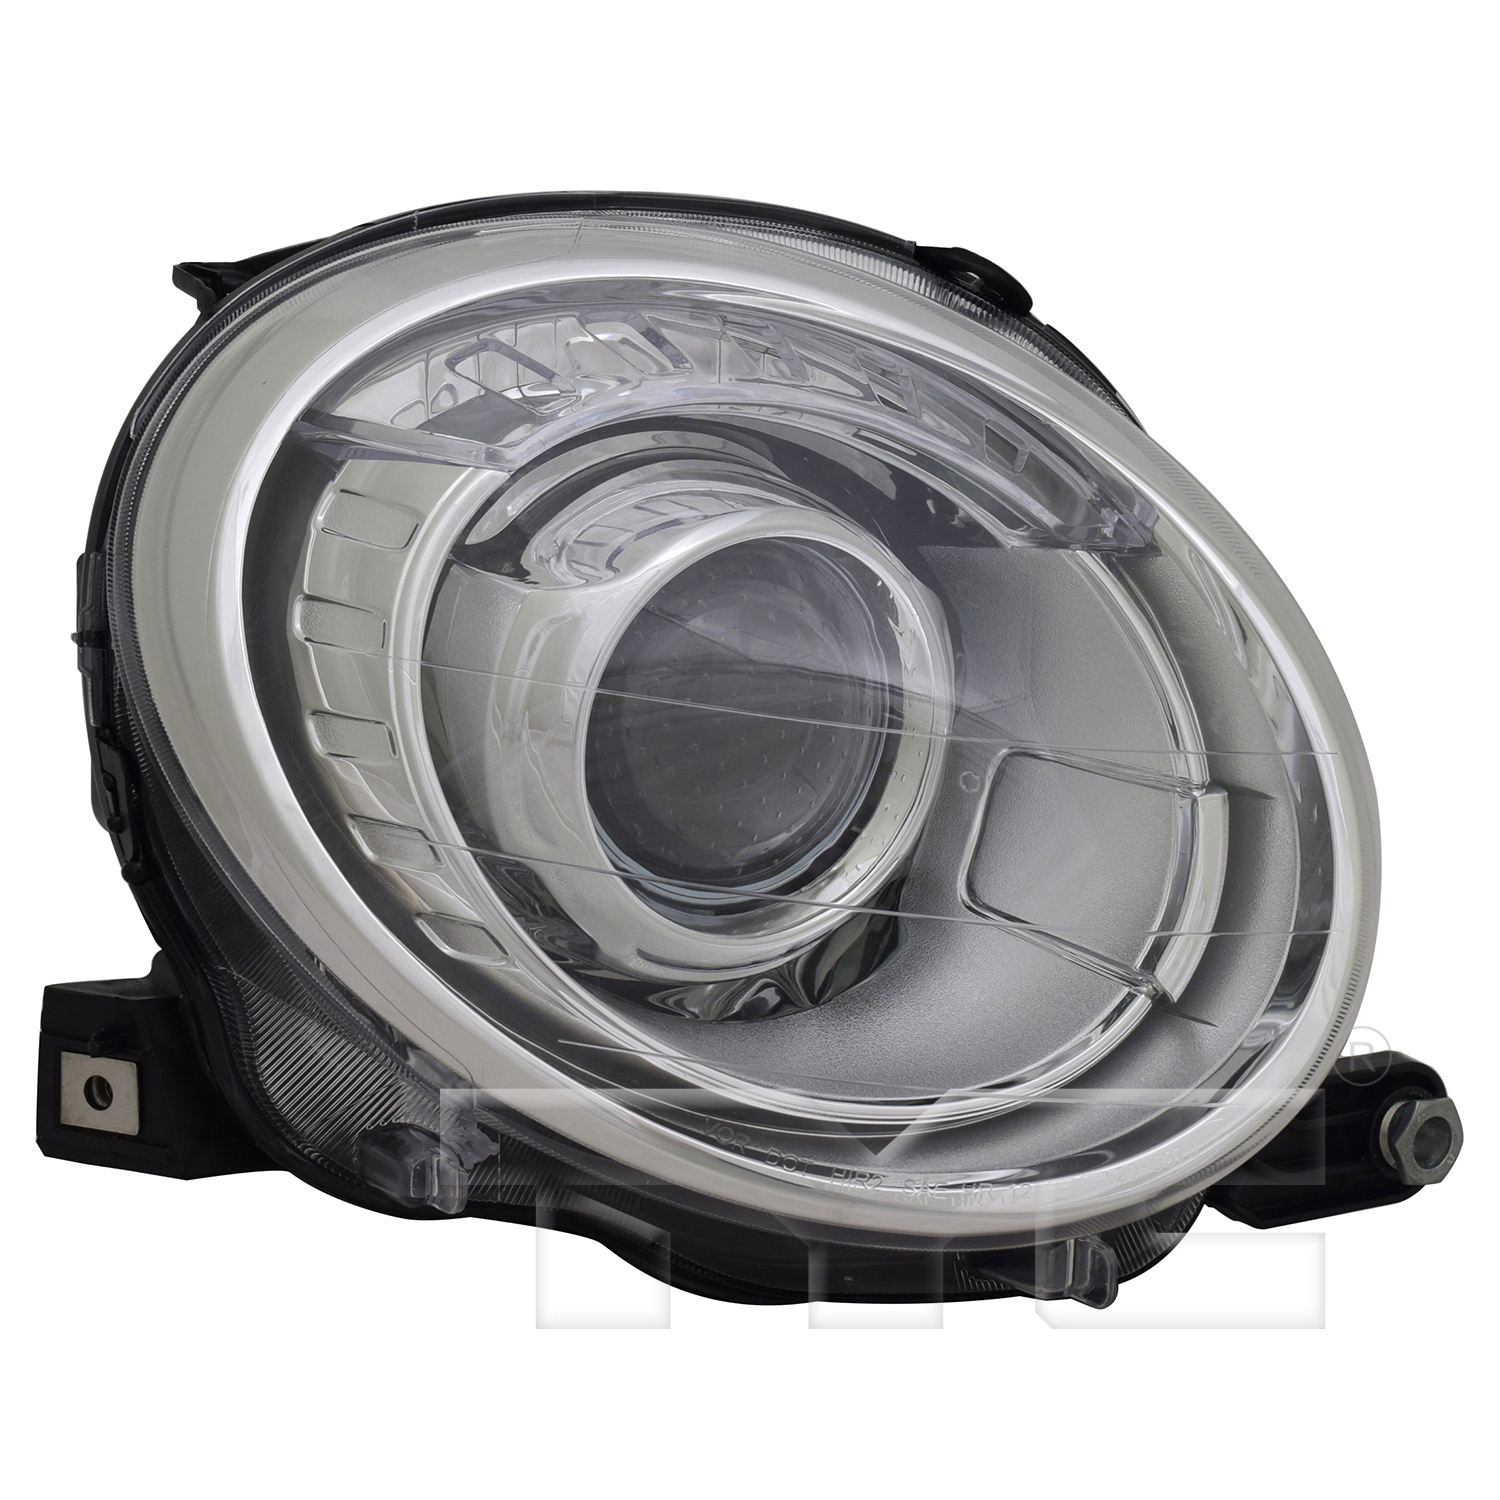 Aftermarket HEADLIGHTS for FIAT - 500, 500,12-18,RT Headlamp assy composite